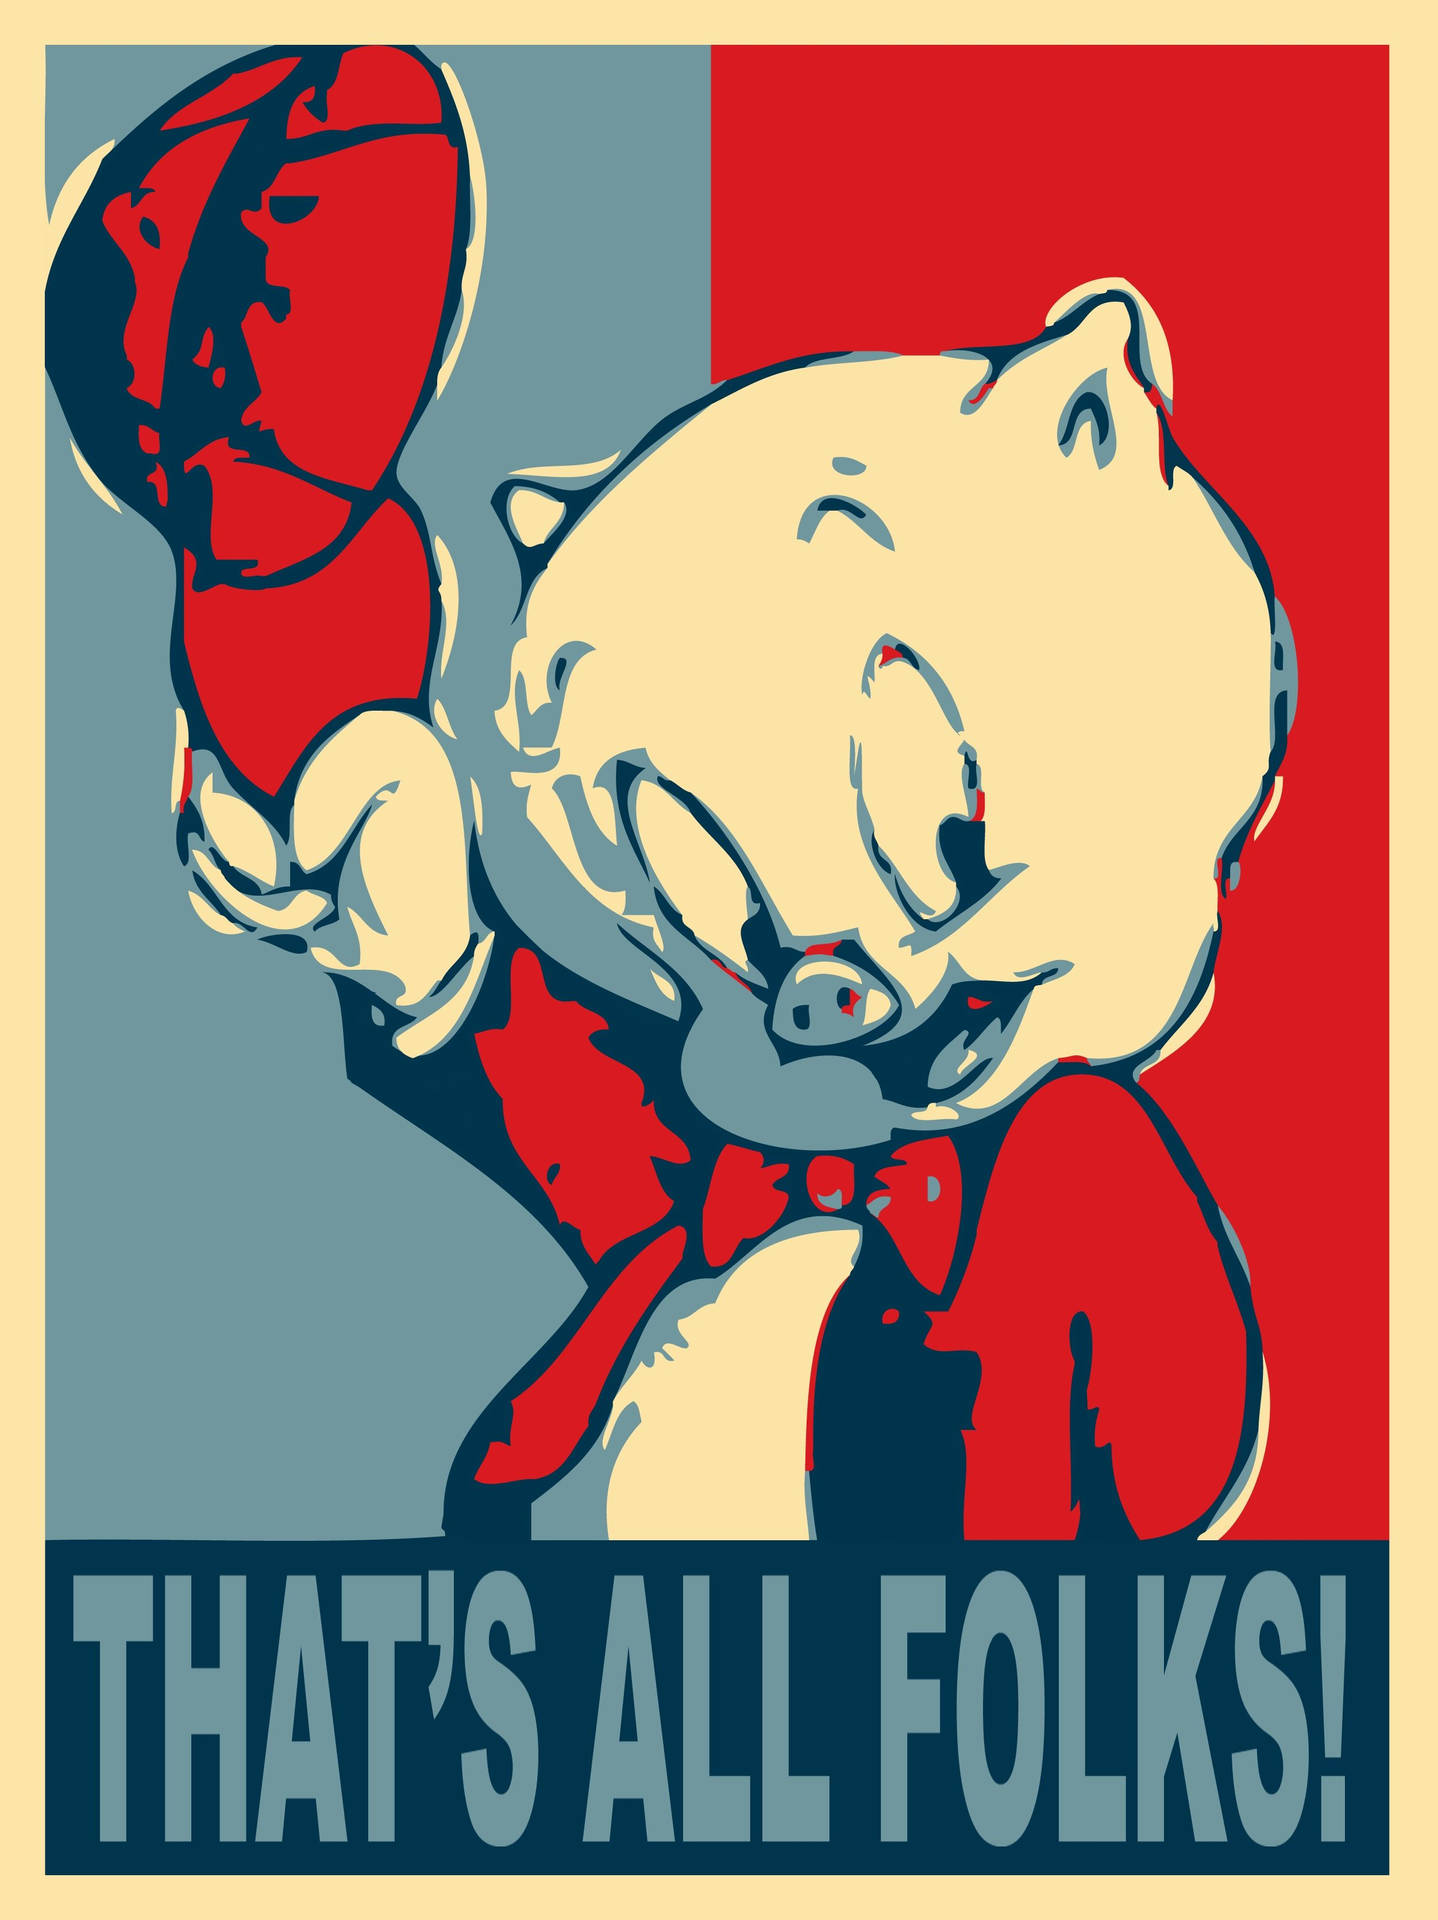 Porkypig - Det Är Allt, Mina Damer Och Herrar. (this Could Be A Funny Or Whimsical Wallpaper Design Featuring Porky Pig With His Iconic Catchphrase 